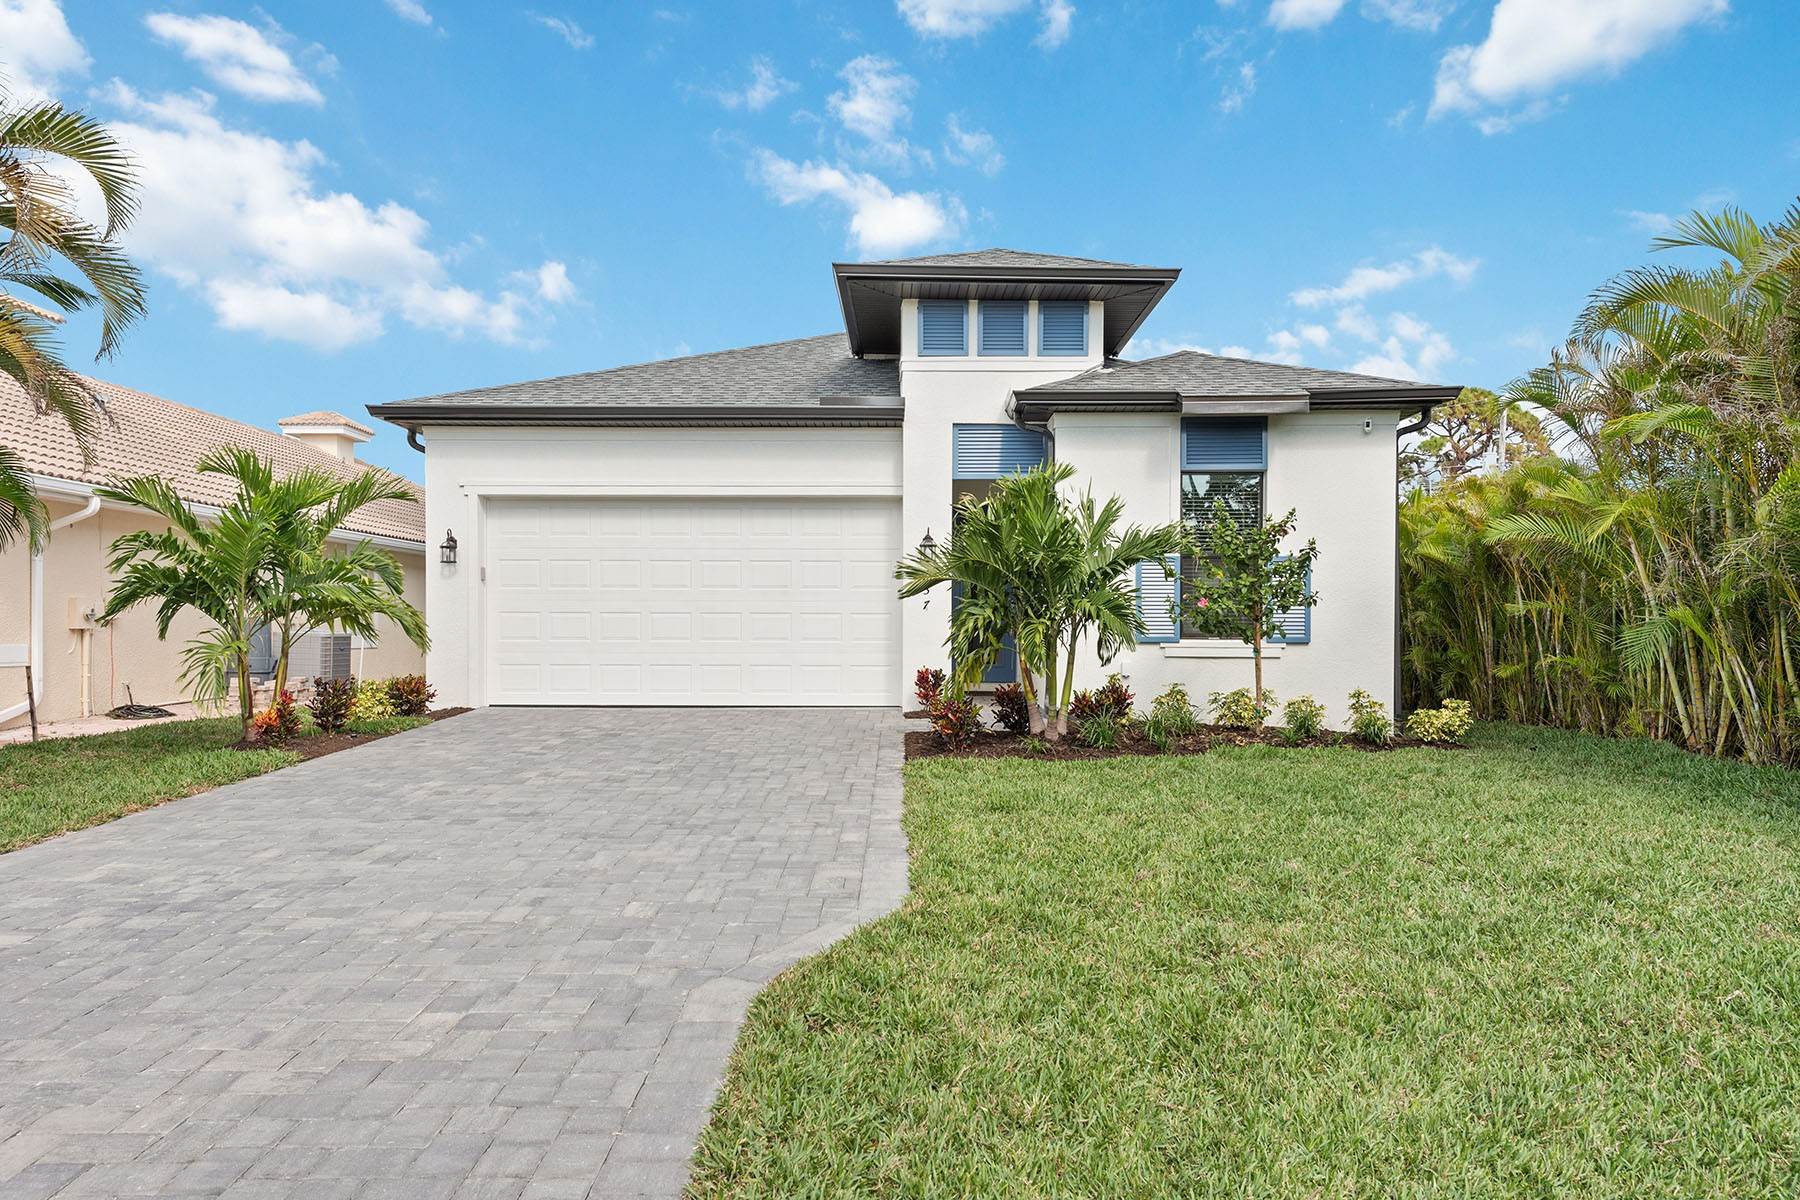 Single Family Homes for Sale at NAPLES PARK 837 99th Avenue N Naples, Florida 34108 United States